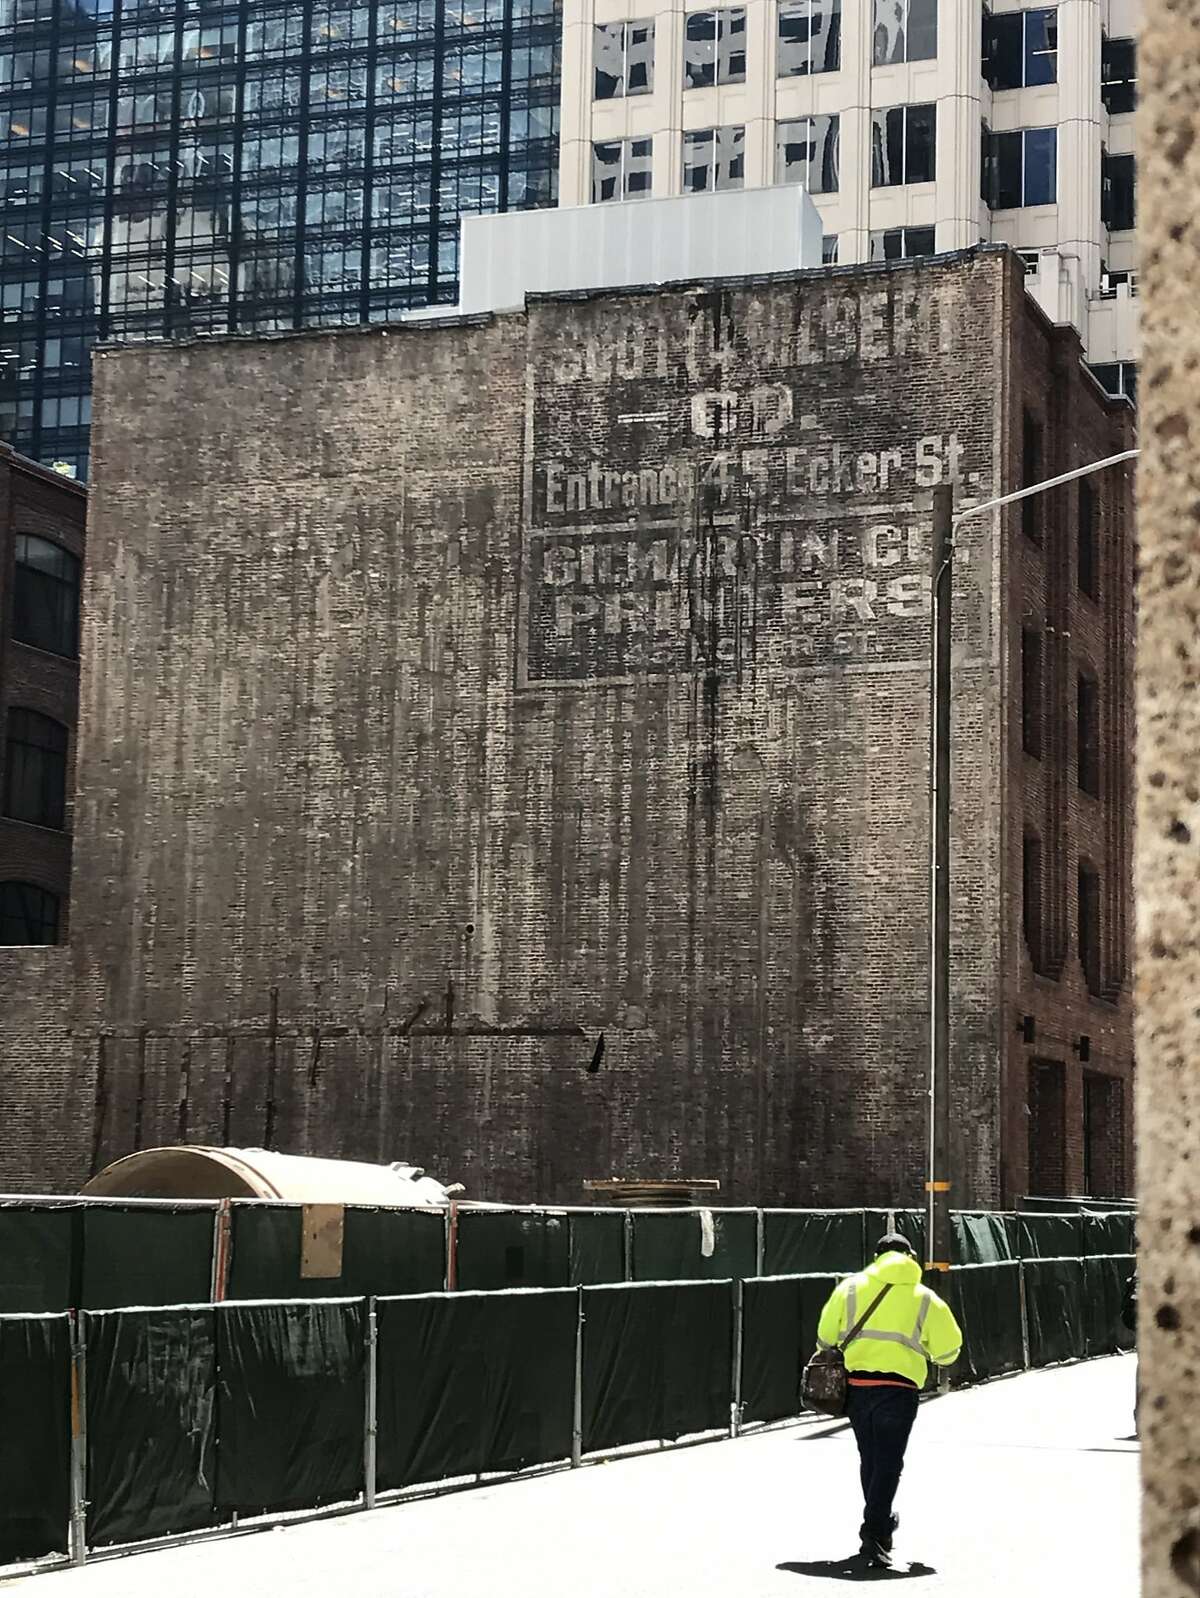 The rear wall of One Ecker as seen from 1st Street -- and the tenants' sign that was hidden for 100 years.